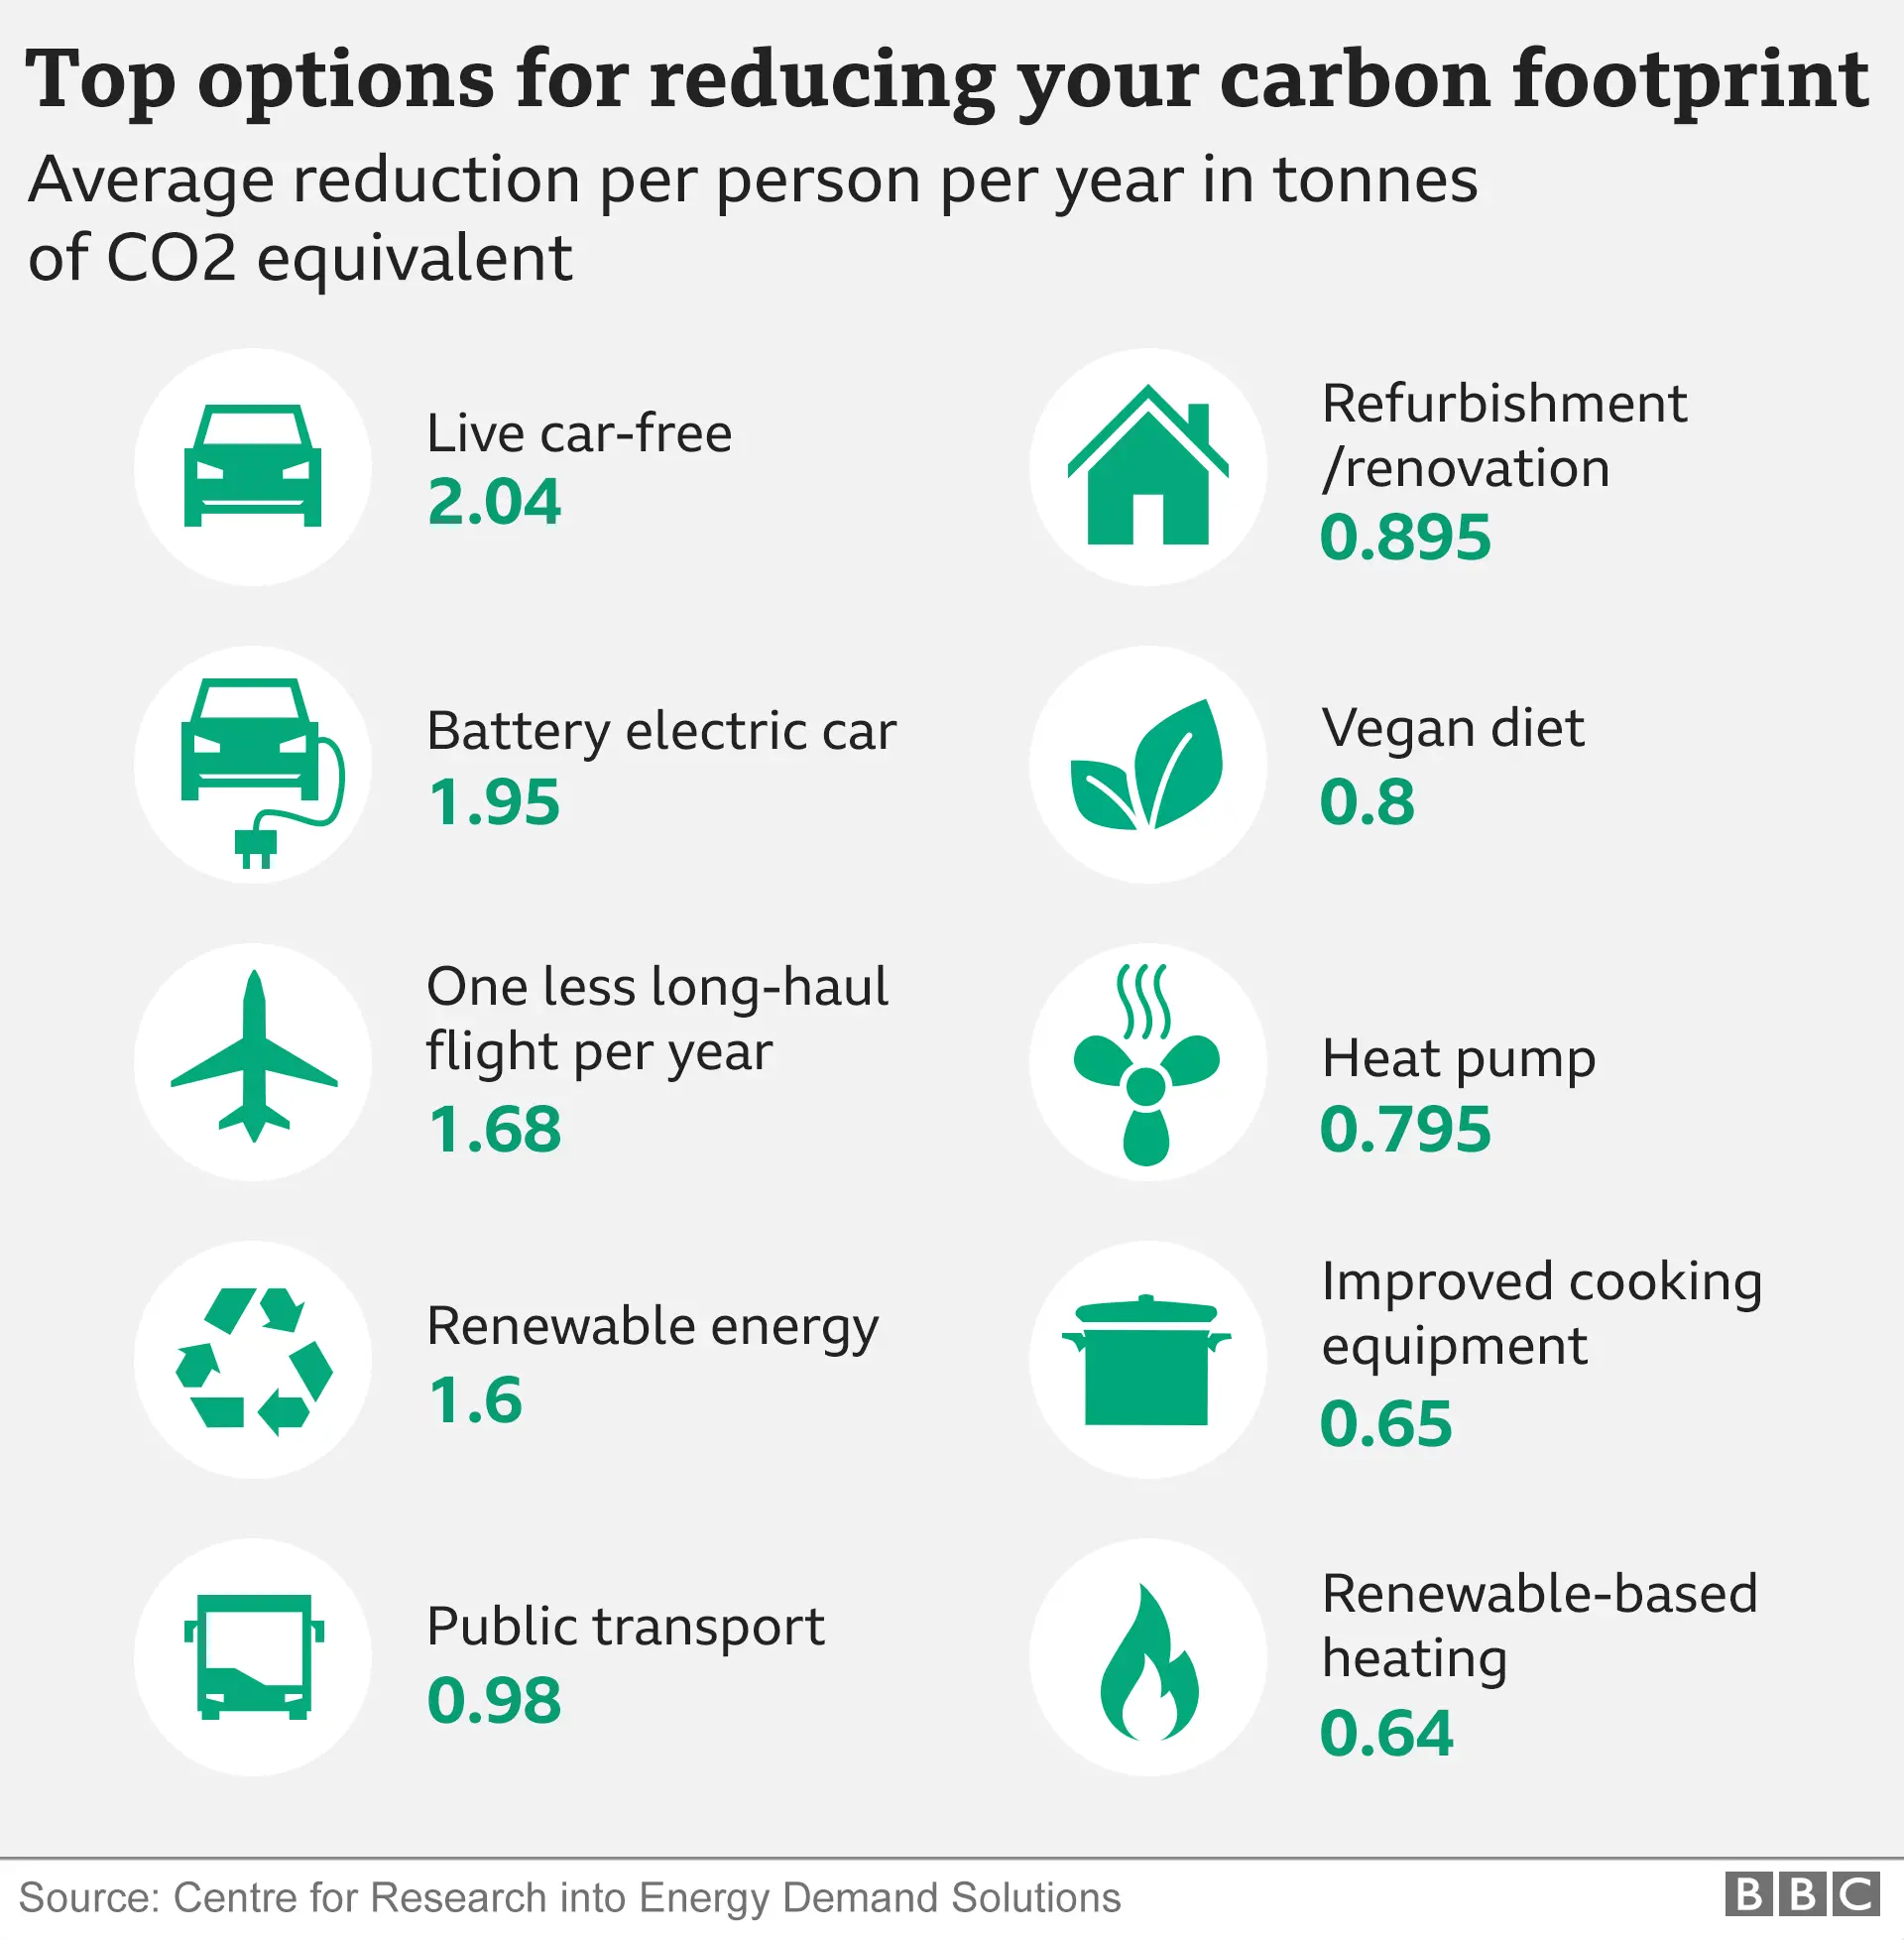 https://ichef.bbci.co.uk/news/480/cpsprodpb/1305E/production/_112381977_carbon_footprint_640-nc.png.webp